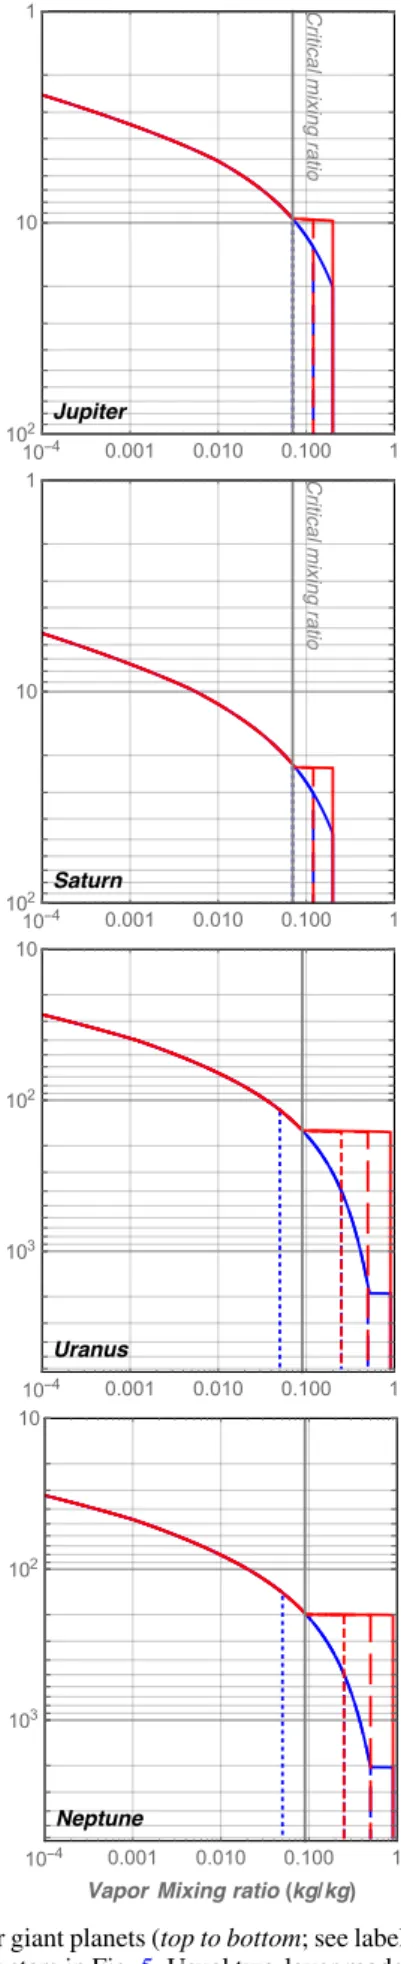 Fig. 4. Temperature (left), potential temperature (middle), and vapor mixing ratio (right) profiles for the four giant planets (top to bottom; see label).